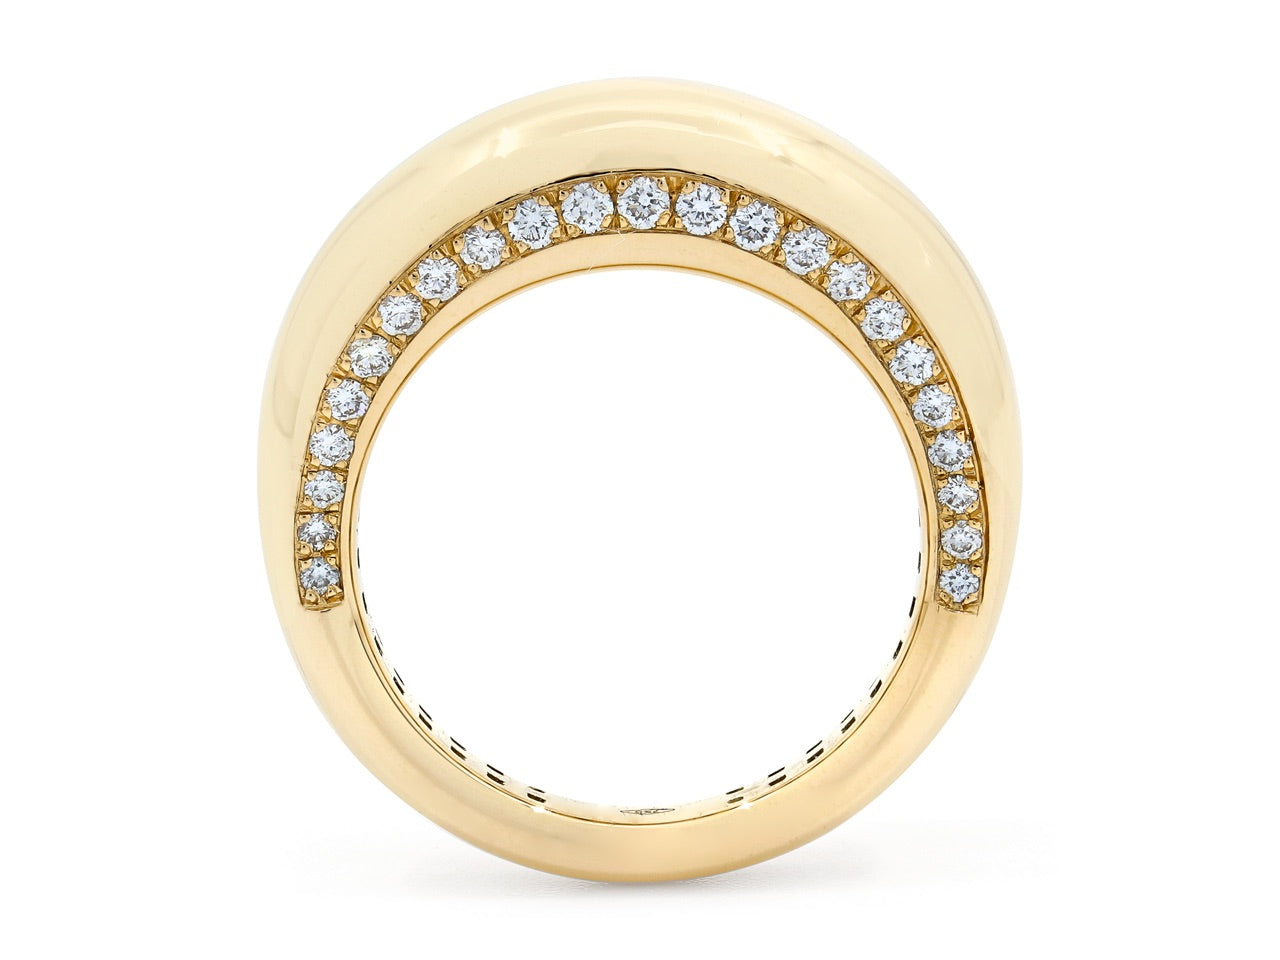 Bombé Gold Ring, with Diamonds, in 18K, by Beladora